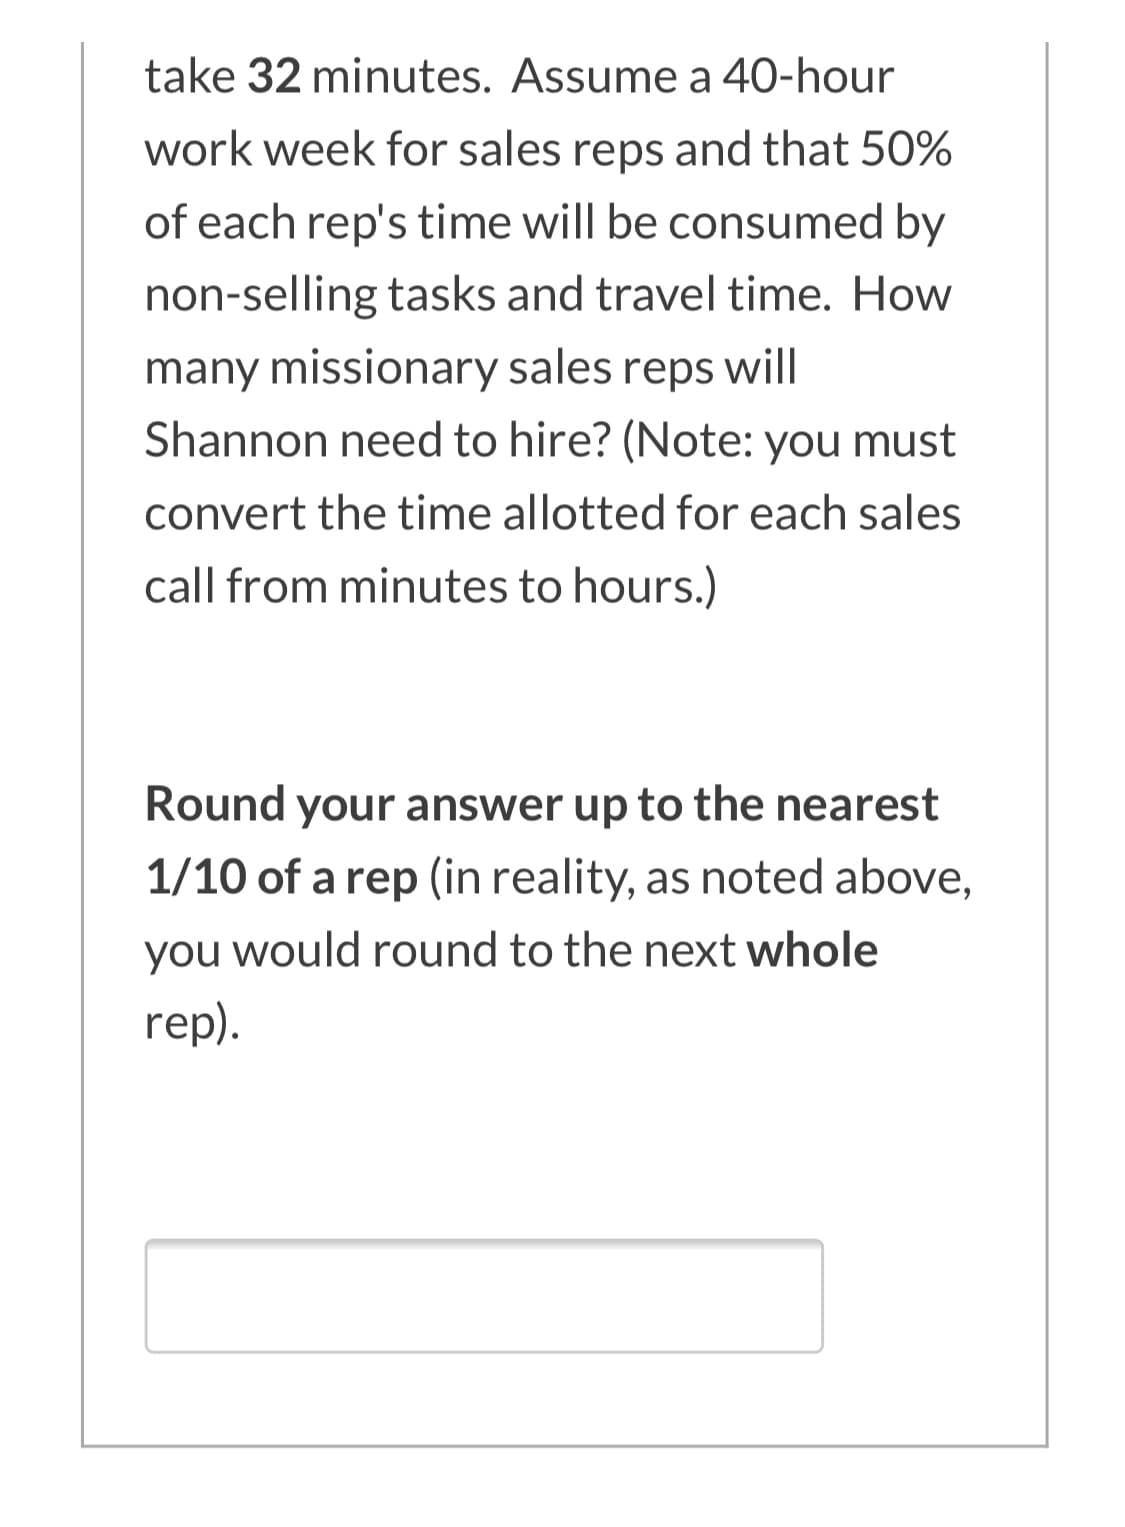 take 32 minutes. Assume a 40-hour
work week for sales reps and that 50%
of each rep's time will be consumed by
non-selling tasks and travel time. How
many missionary sales reps will
Shannon need to hire? (Note: you must
convert the time allotted for each sales
call from minutes to hours.)
Round your answer up to the nearest
1/10 of a rep (in reality, as noted above,
you would round to the next whole
rep).
